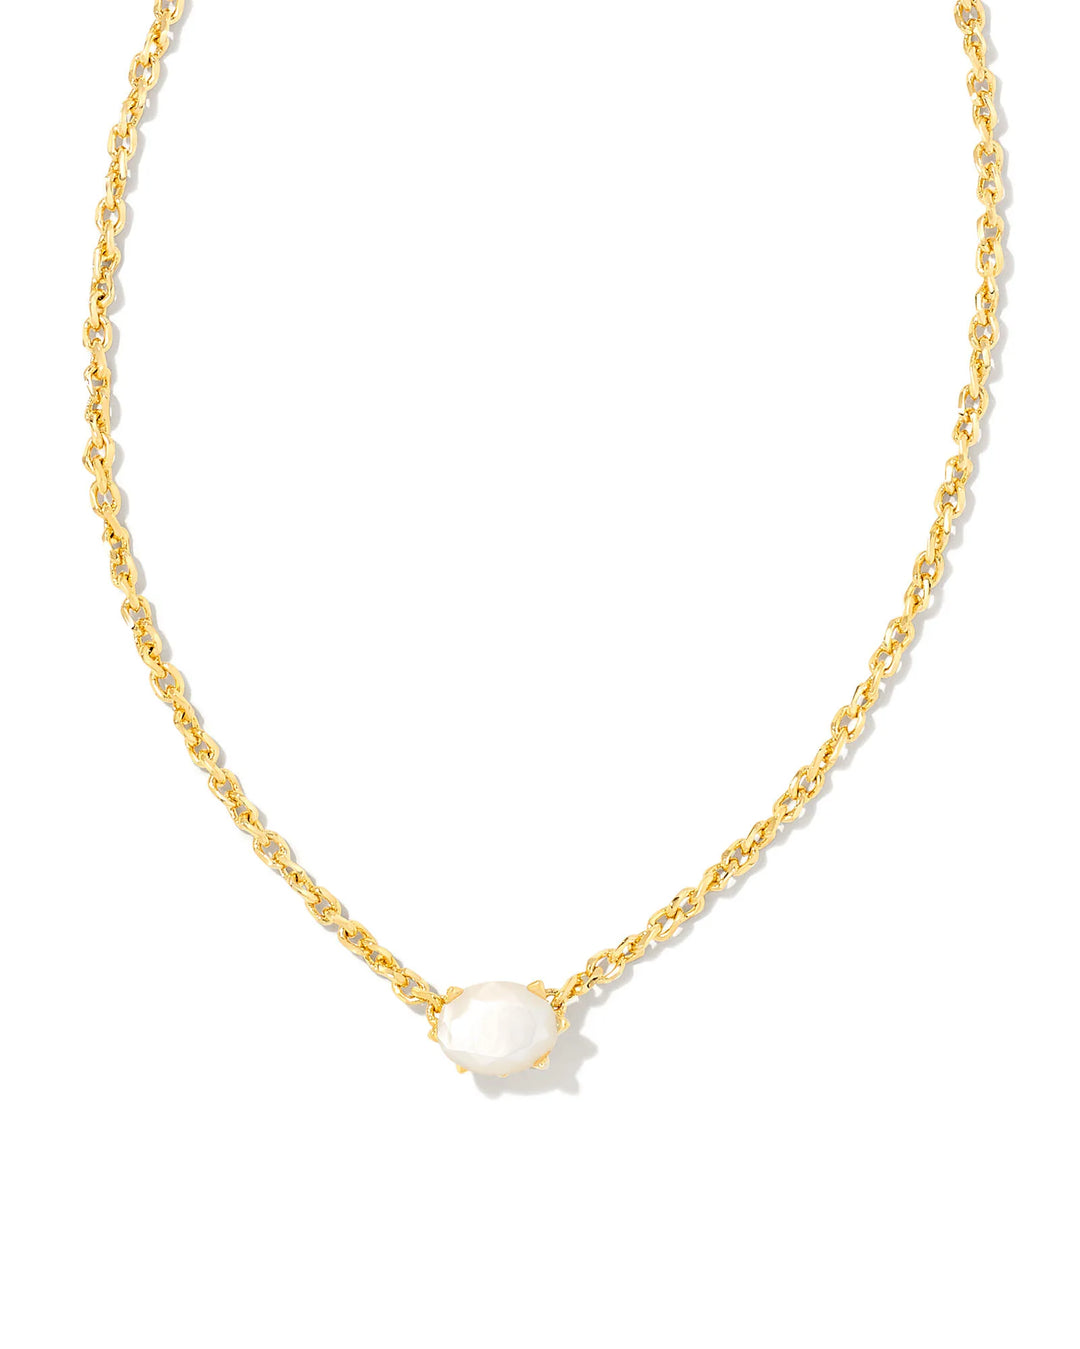 CAILIN CRYSTAL PENDANT NECKLACE - GOLD IVORY MOP